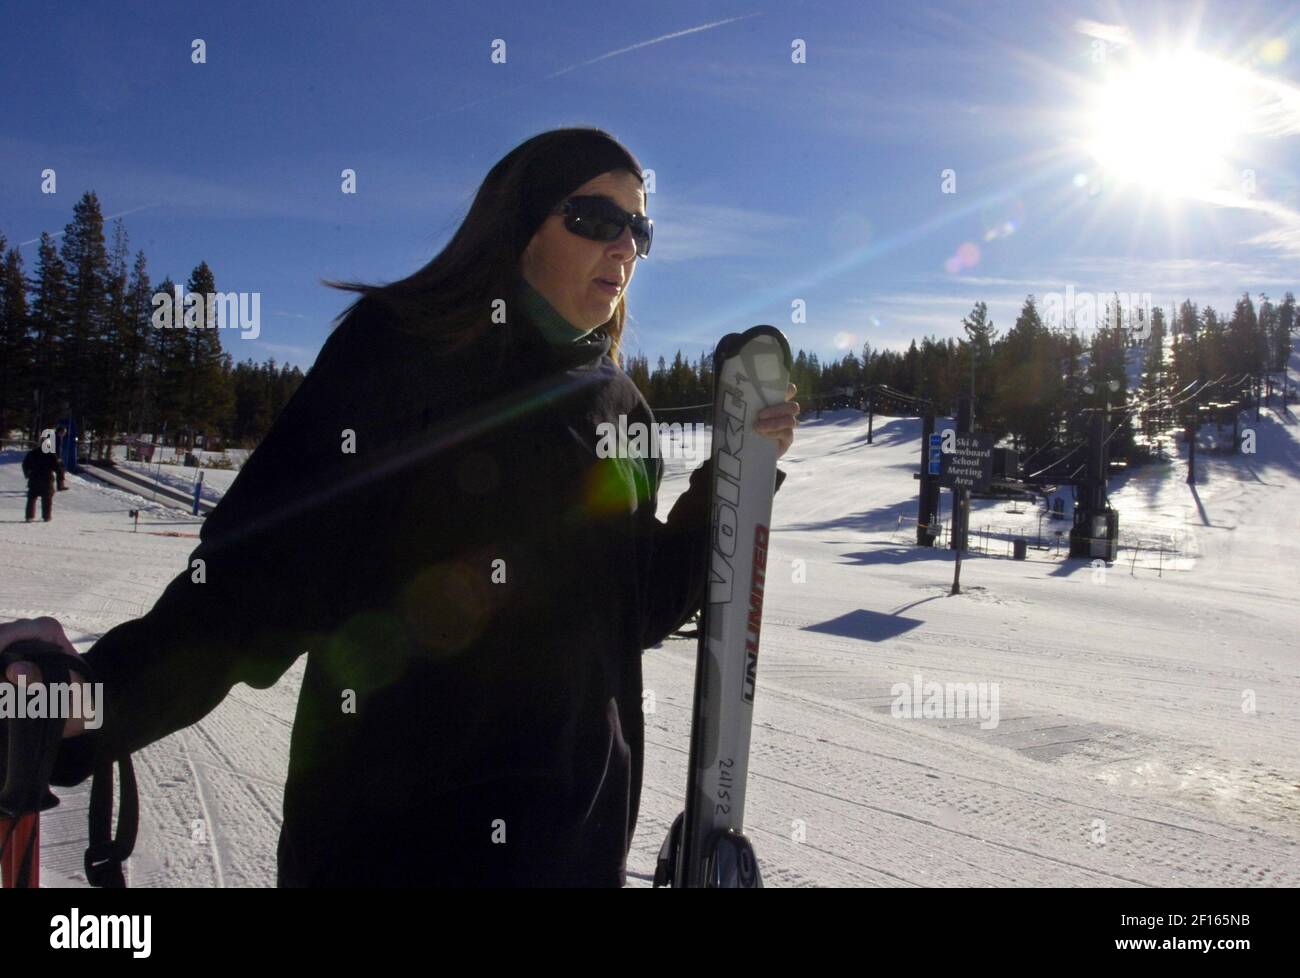 Jennifer Mitchell of Austin, Texas, says that she's pleased with the ski conditions at Boreal Mountain Resort in Truckee California, Monday, February 6, 2007. She added that it was much like spring skiing. (Photo by Herman Bustamante Jr./Contra Costa Times/MCT/Sipa USA) Stock Photo